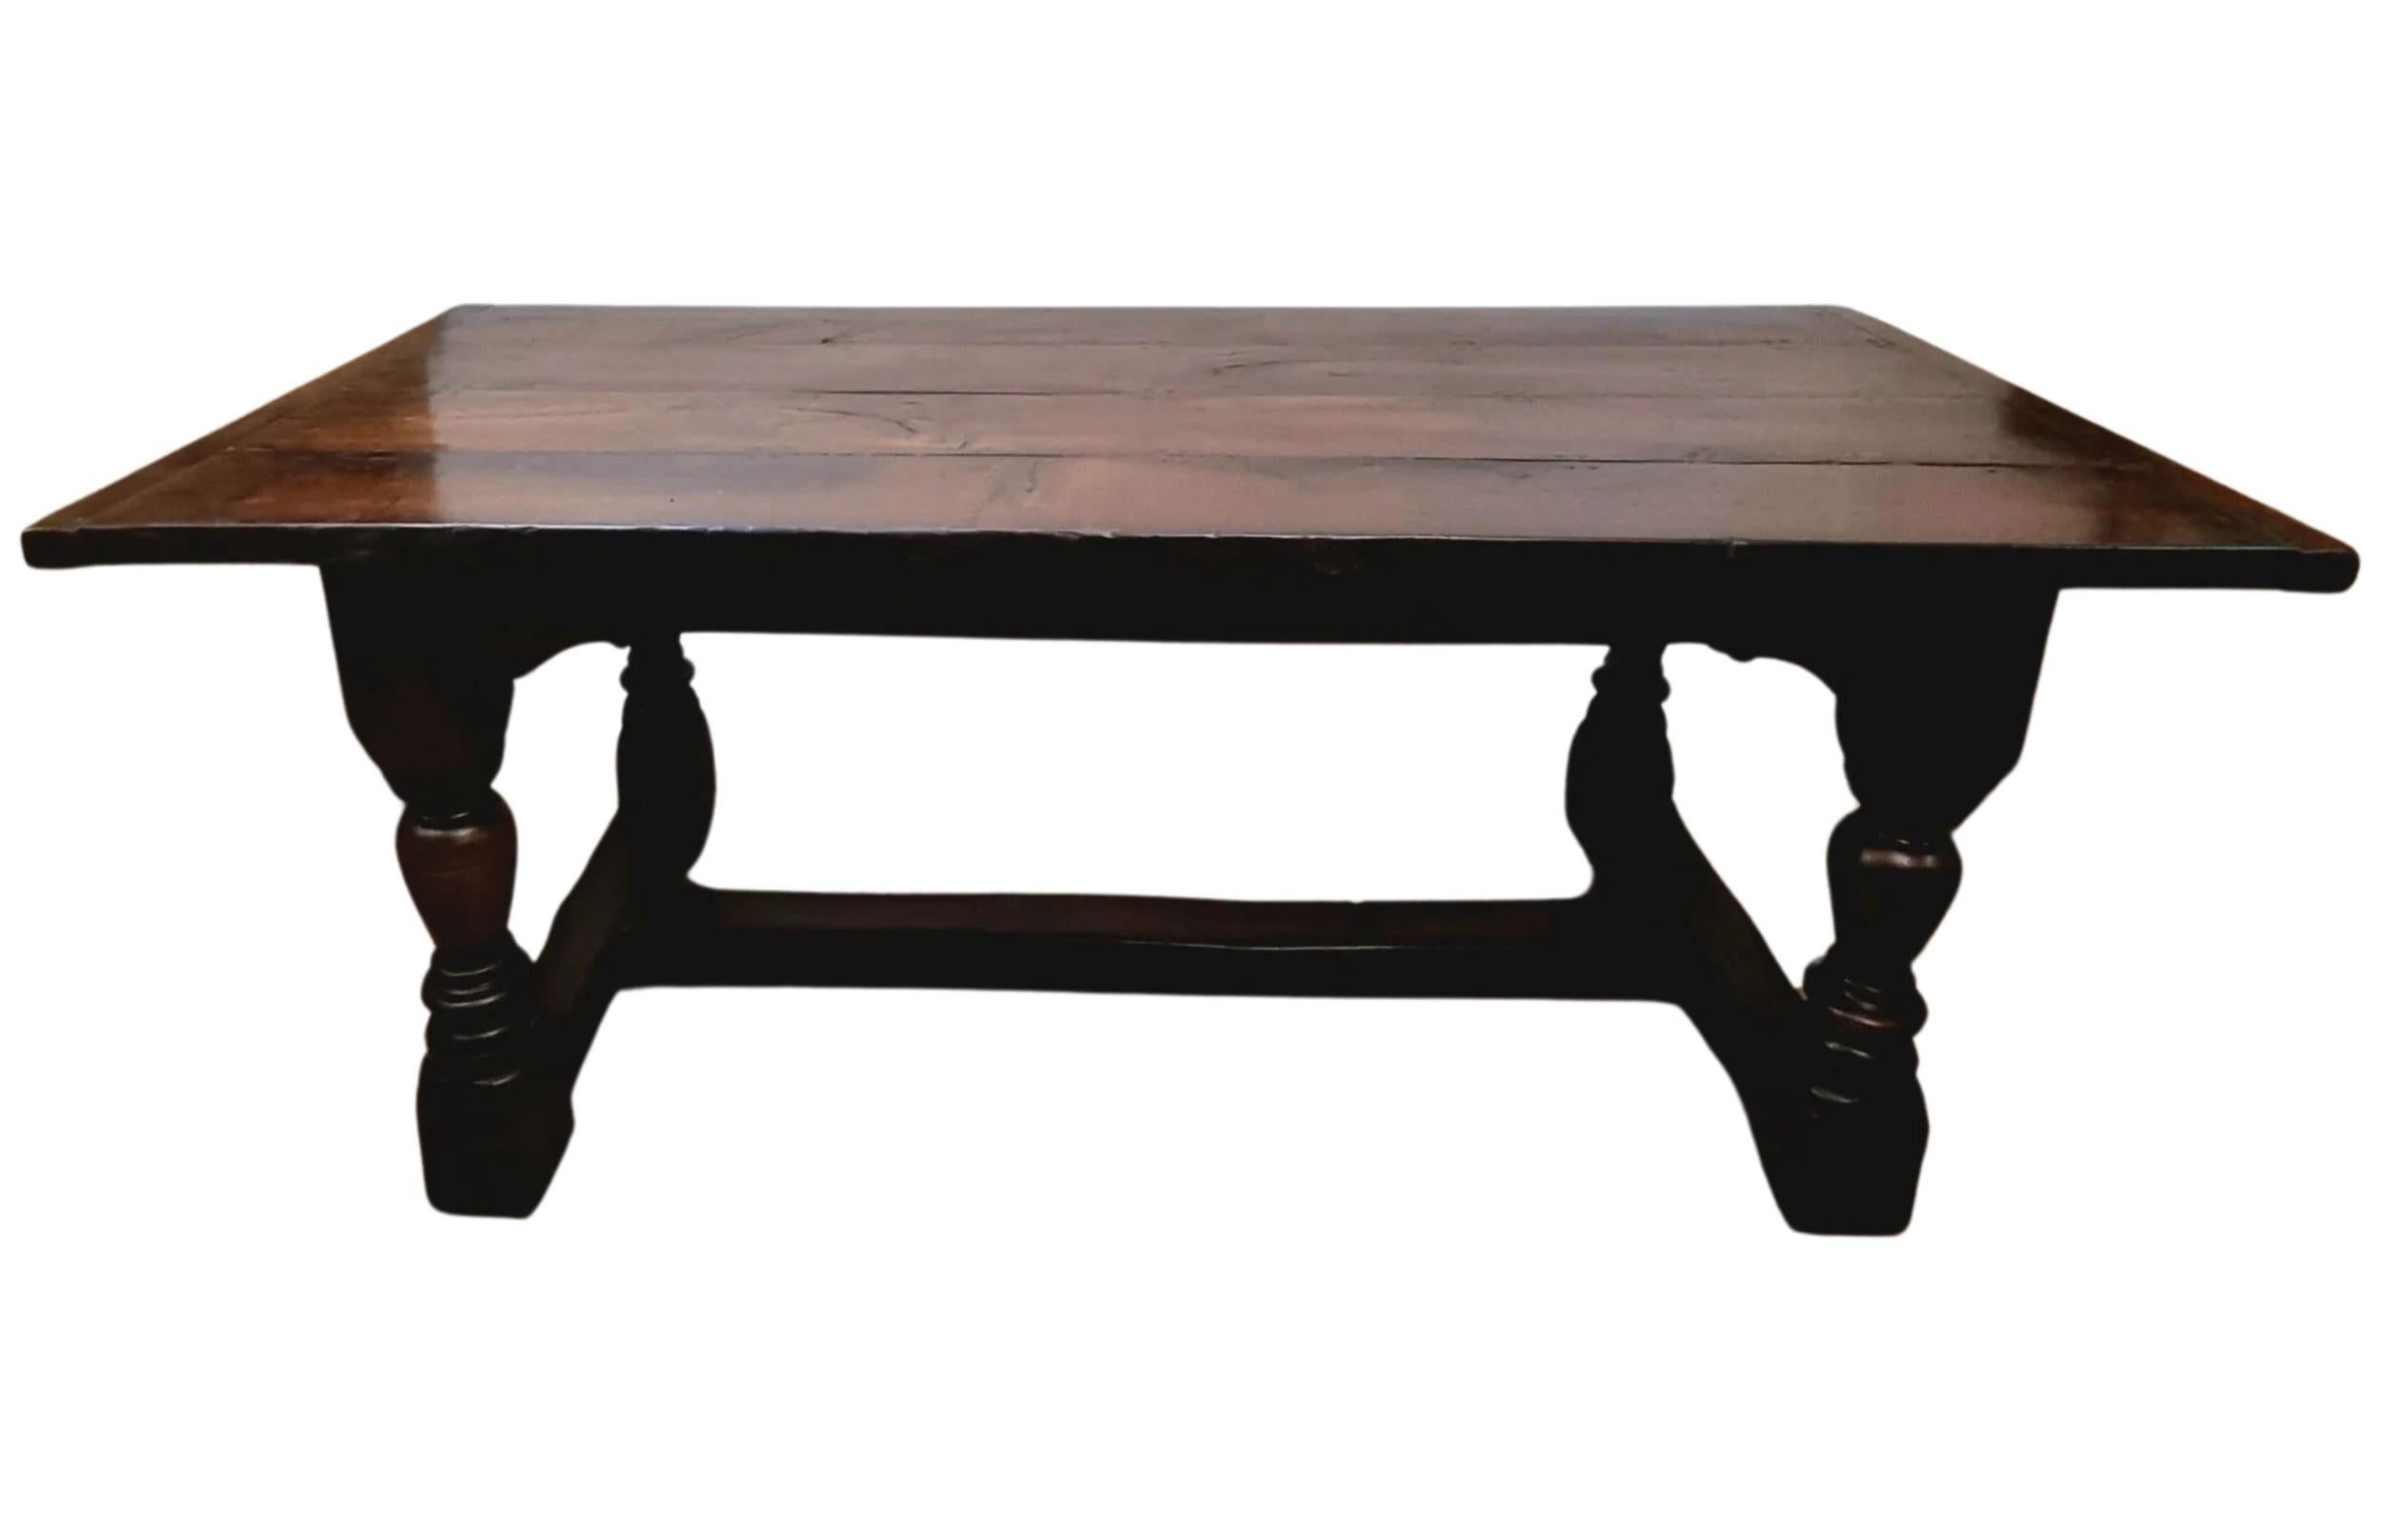 A 17th-century Oak Charles II Refectory table, dating from 1660-1685, comfortably seats six people. It features turned legs with side and centre stretchers and a solid four-plank oak top. The table exhibits a wonderful deep, rich patina that has